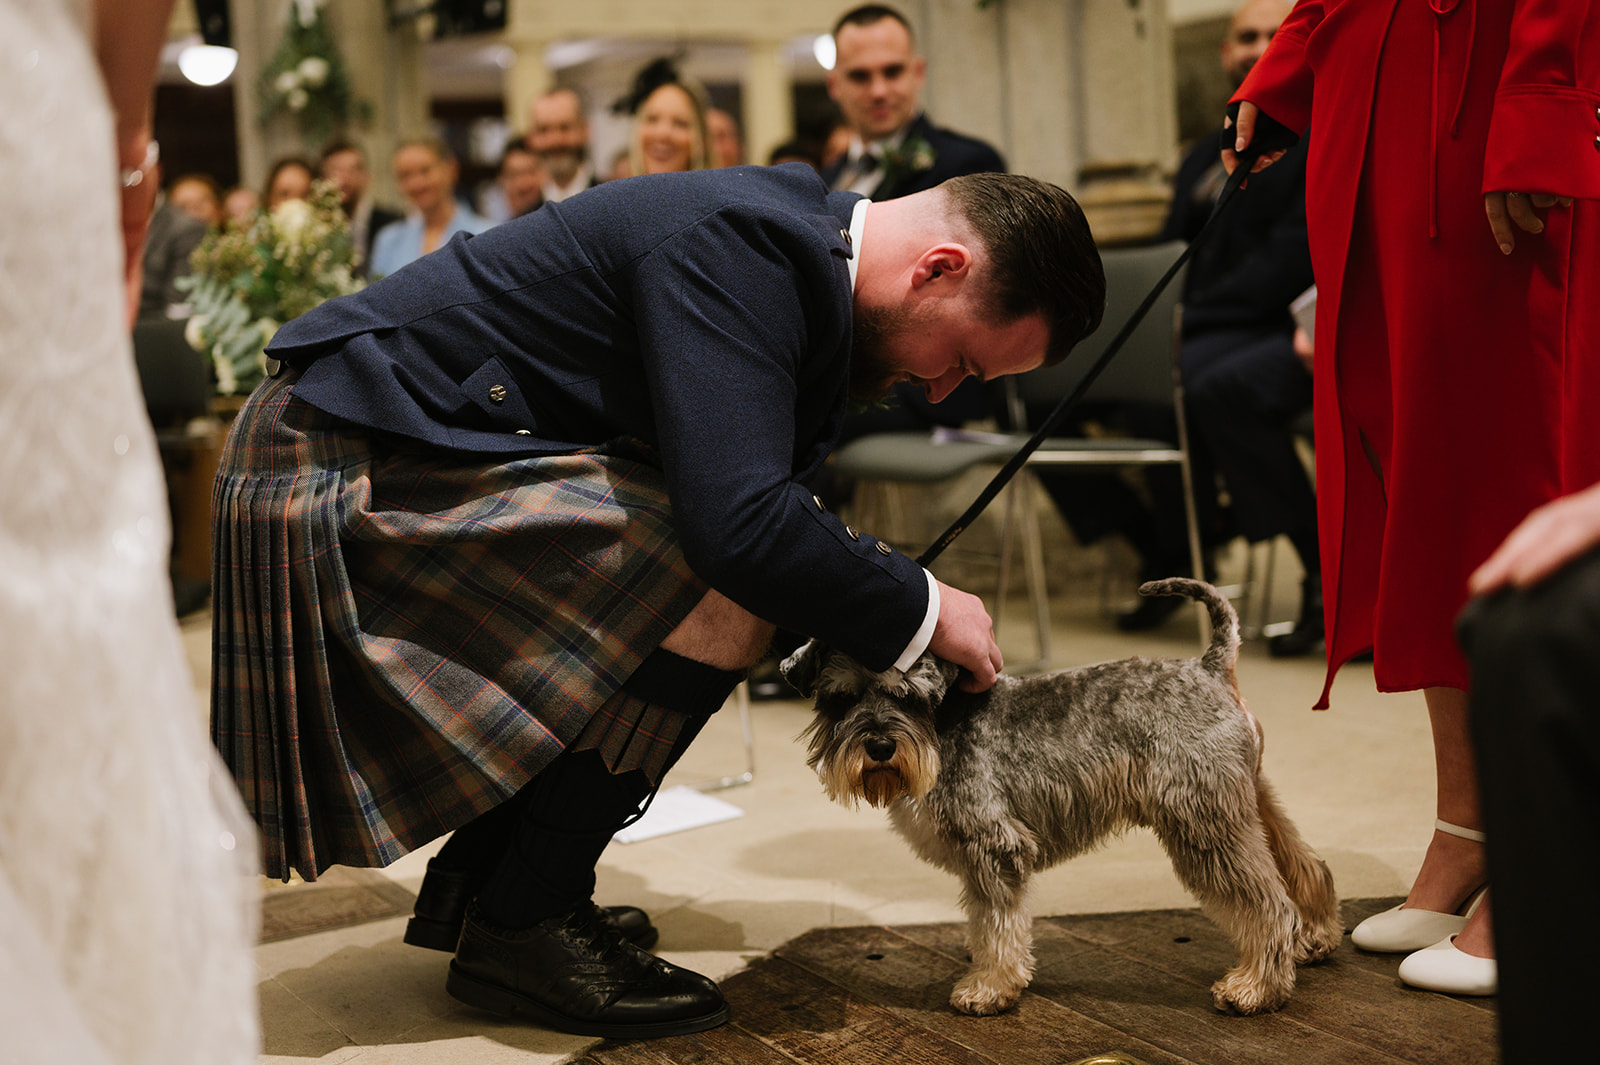 Their dog brings the wedding rings during the ceremony at St Helen's Church Bishopsgate